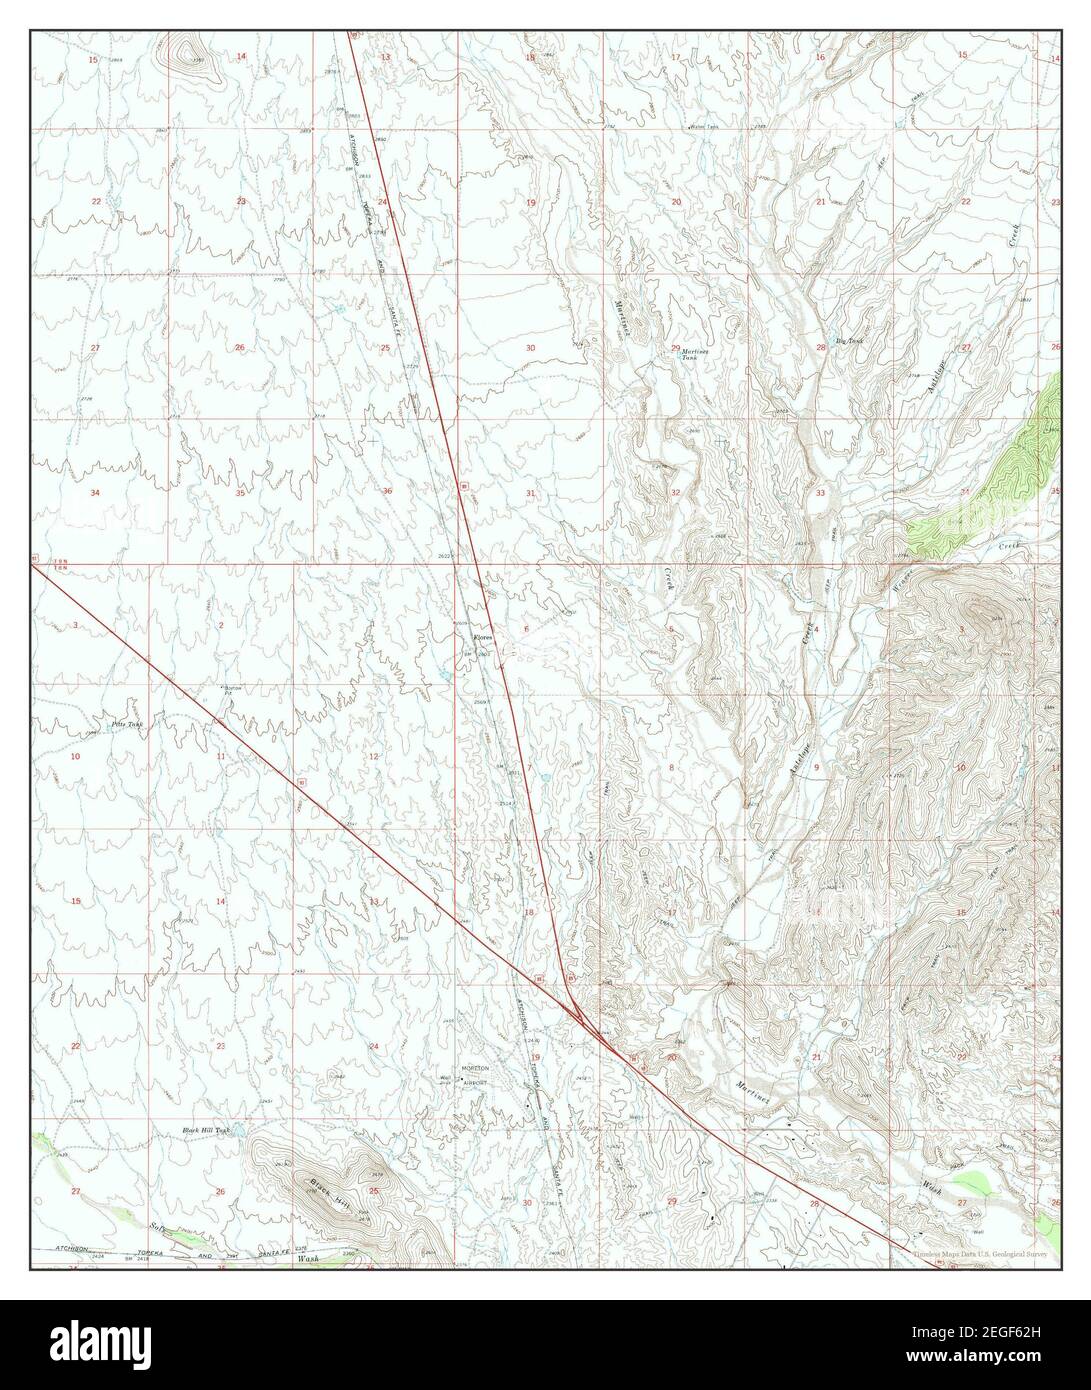 Flores, Arizona, map 1969, 1:24000, United States of America by Timeless Maps, data U.S. Geological Survey Stock Photo